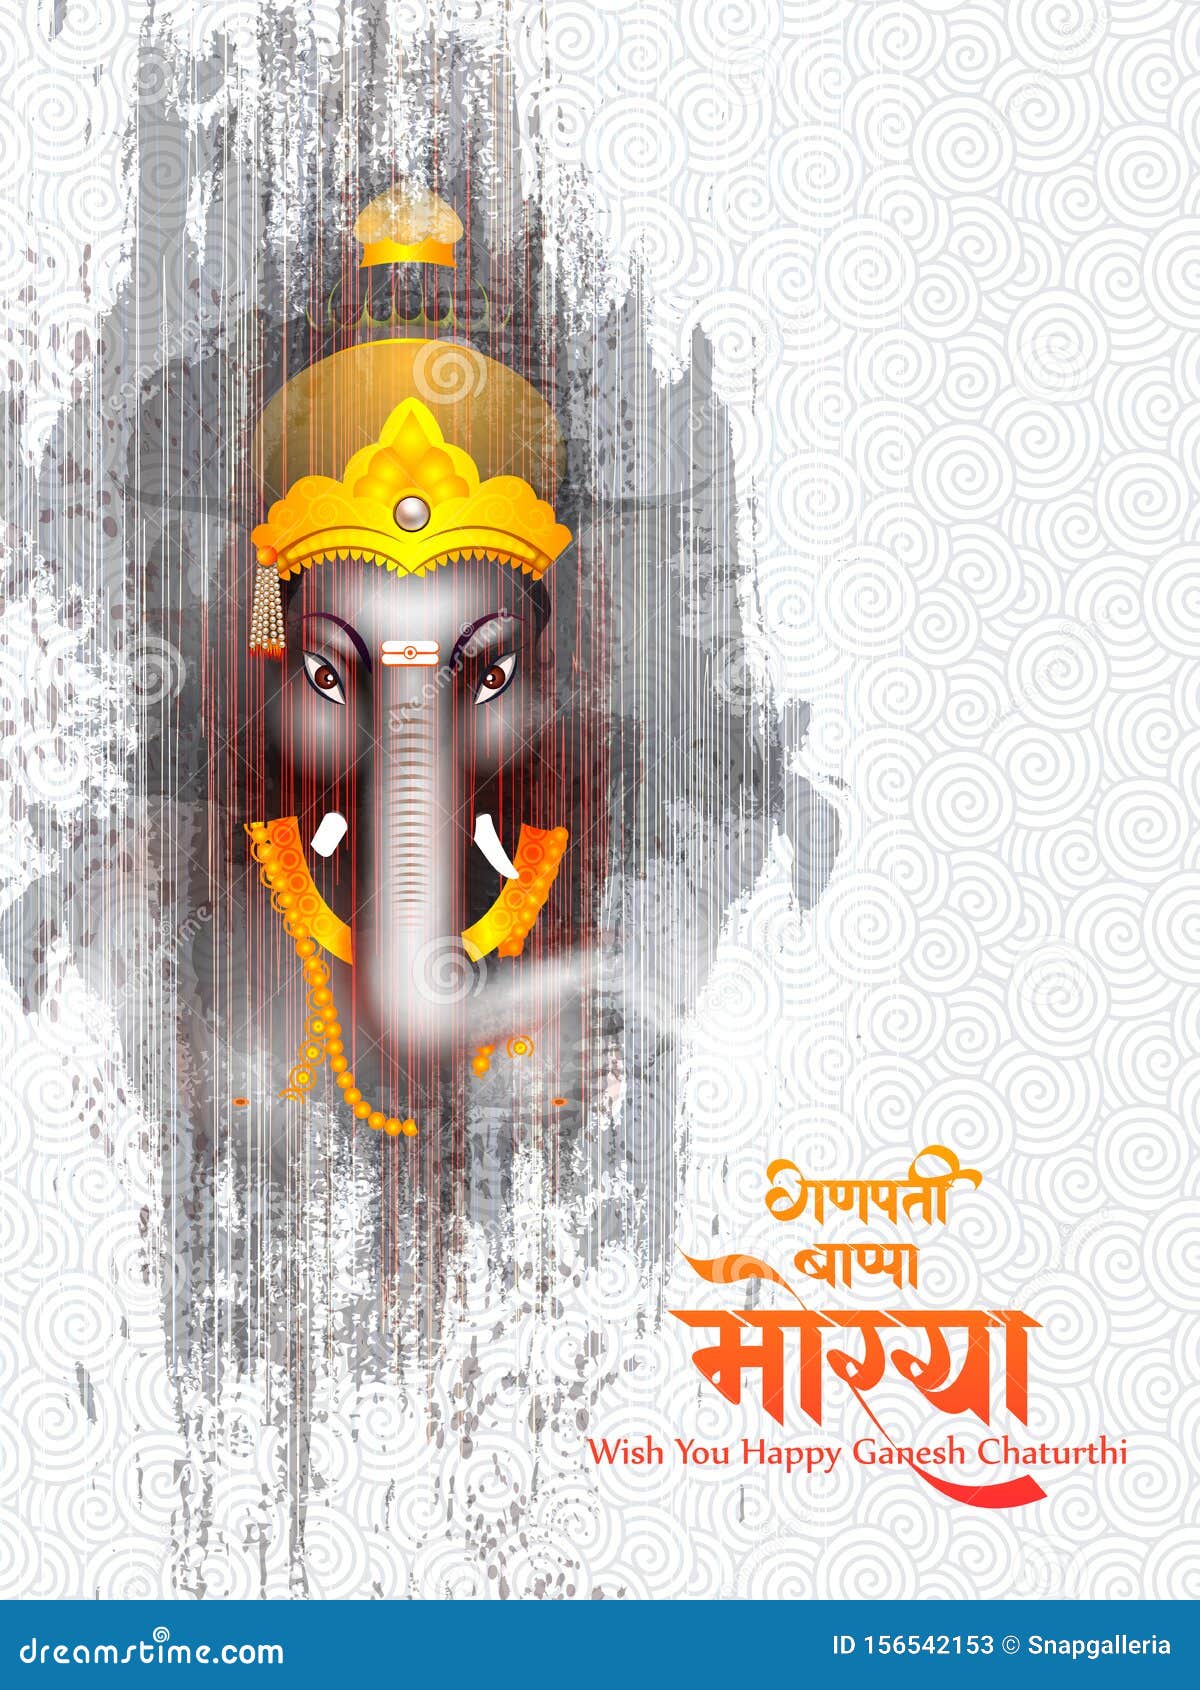 Lord Ganpati on Ganesh Chaturthi Background and Message in Hindi Meaning Oh  My Lord Ganesha Stock Vector - Illustration of ganapati, india: 156542153